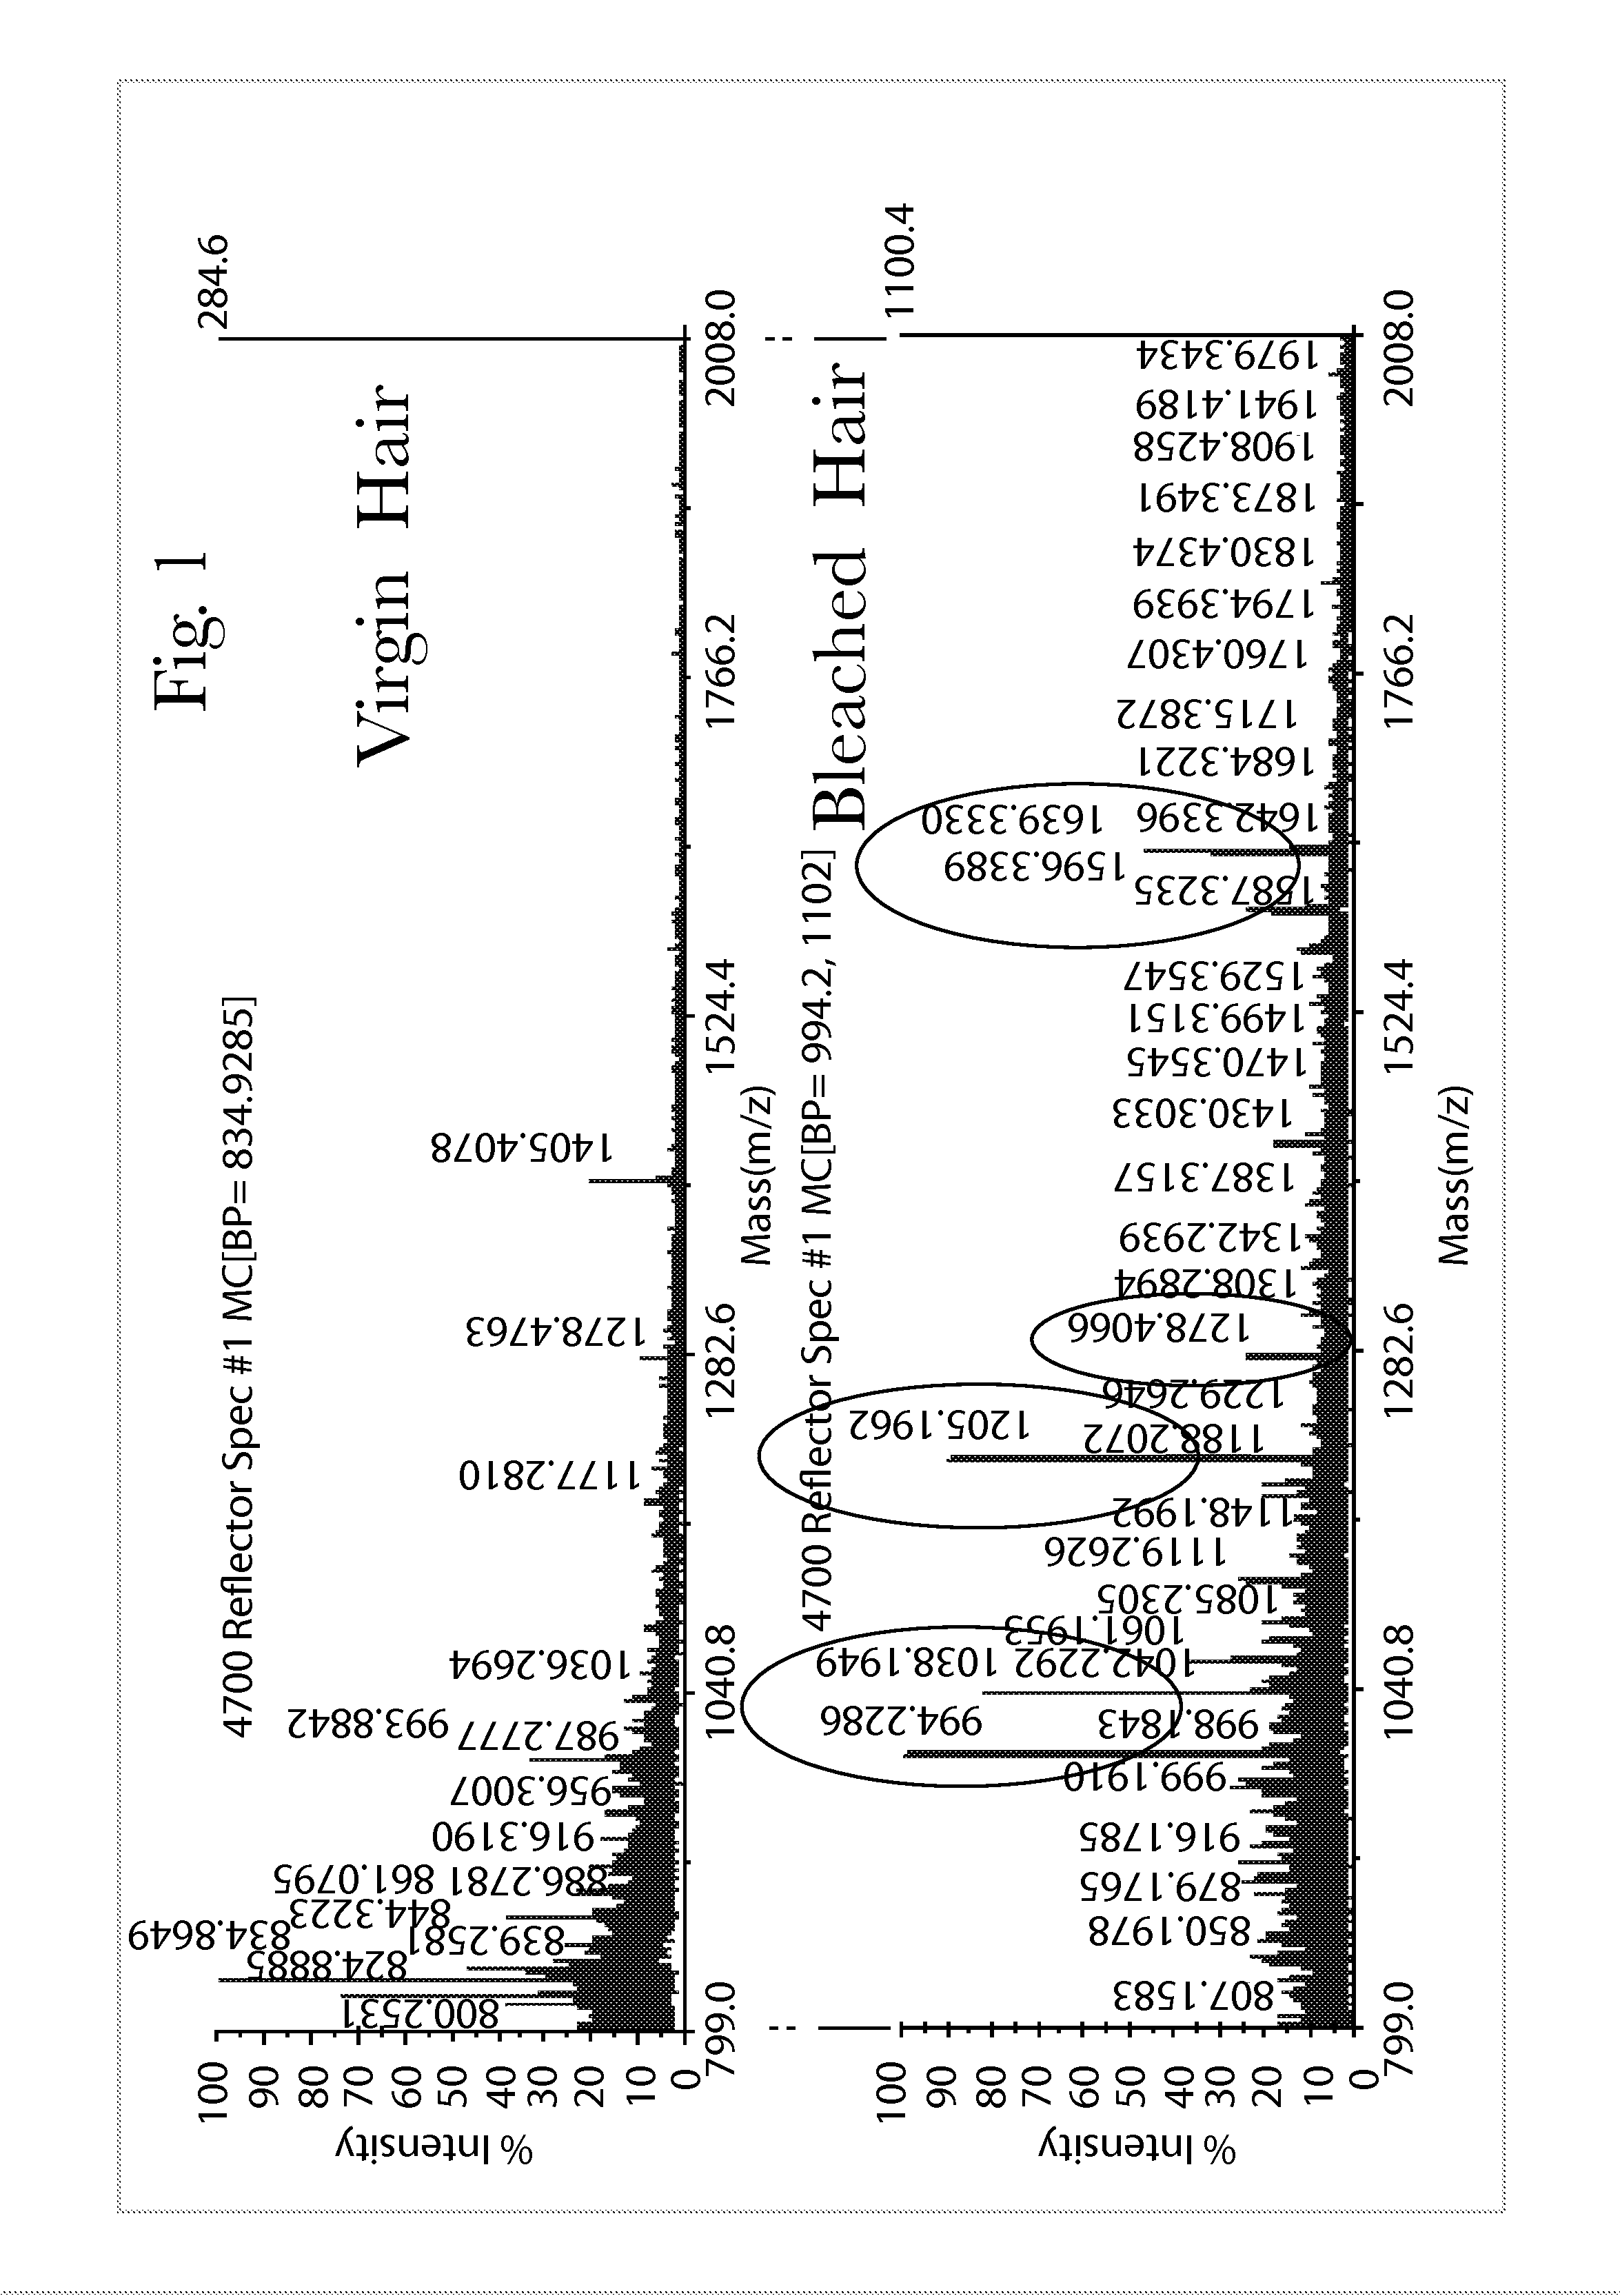 Systems and Methods of Detecting and Demonstrating Hair Damage Via Evaluation of Protein Fragments